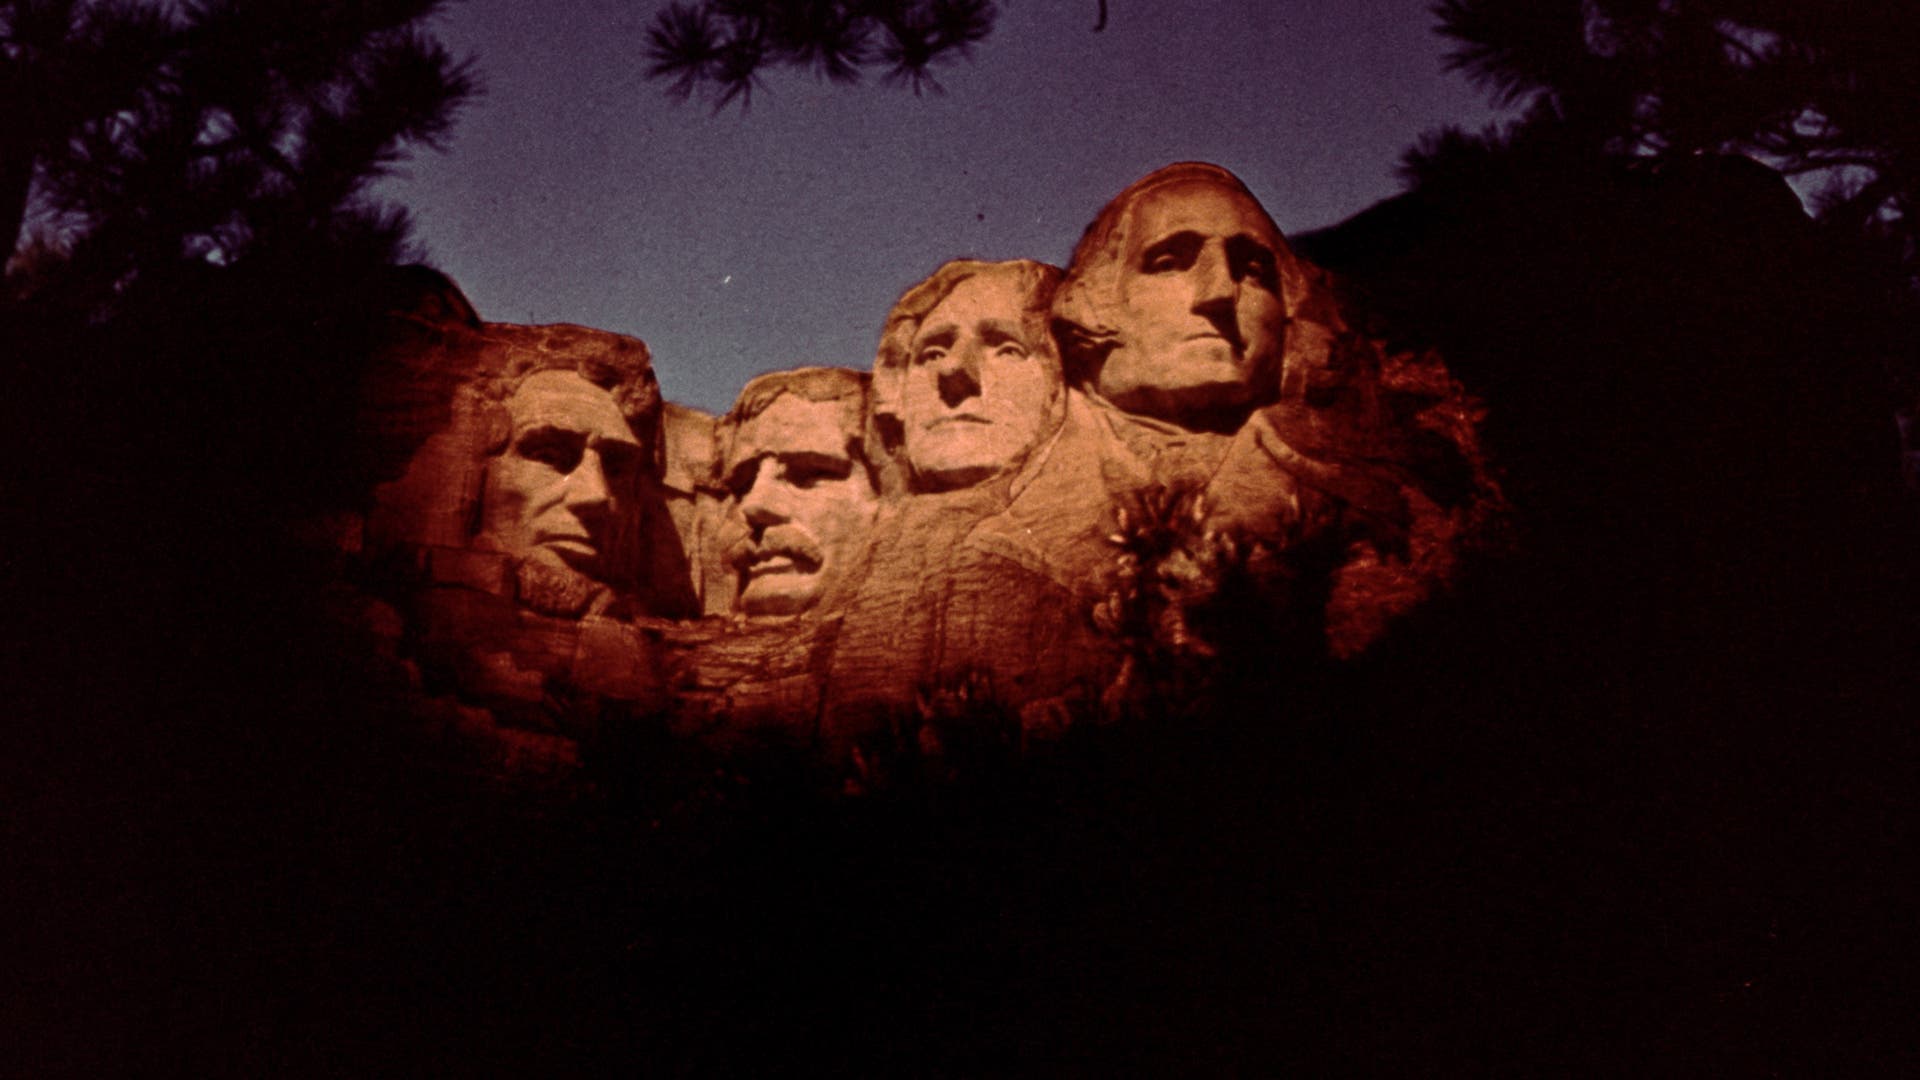 Why Native Americans Have Protested Mount Rushmore?